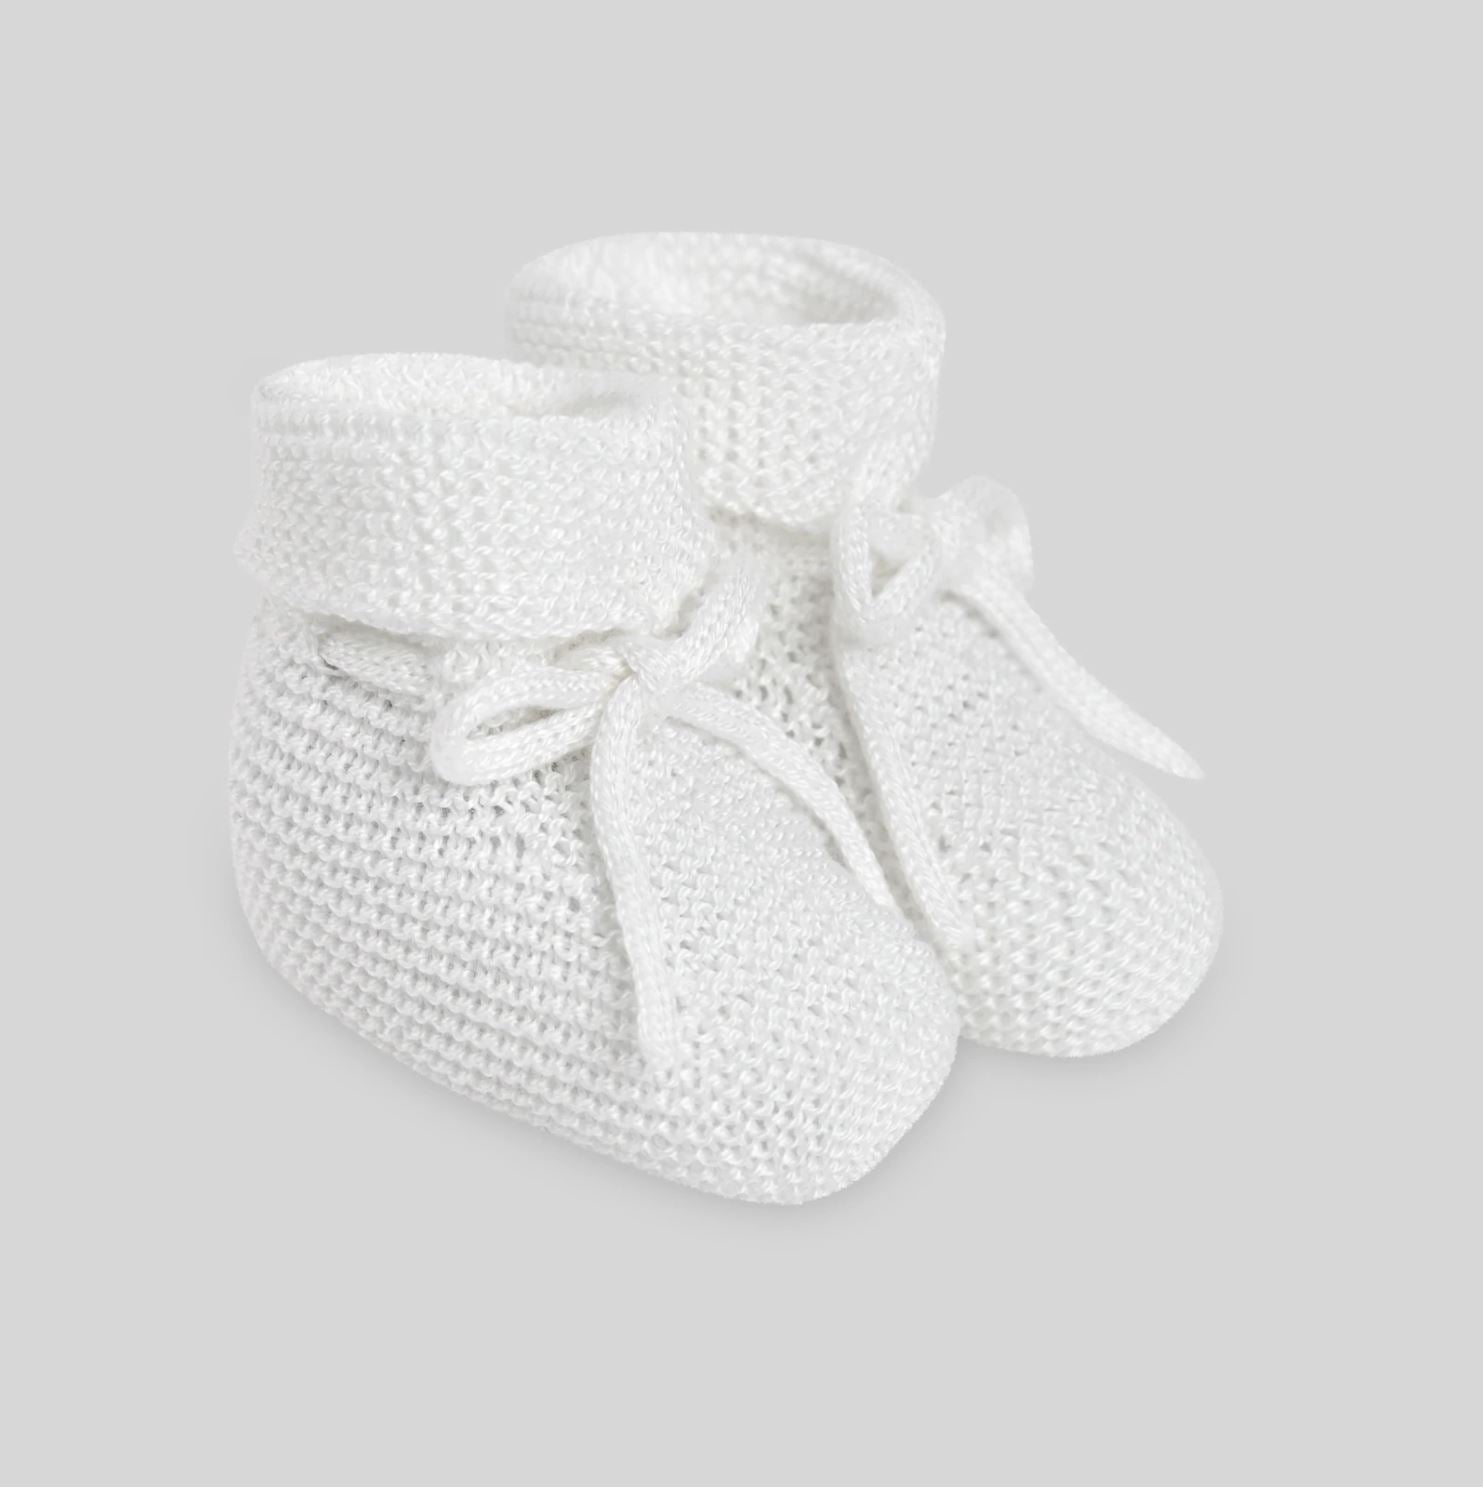 Paz Rodriguez 2-Piece (Romper, Knitted Shoes) Gift Set - Grey & White